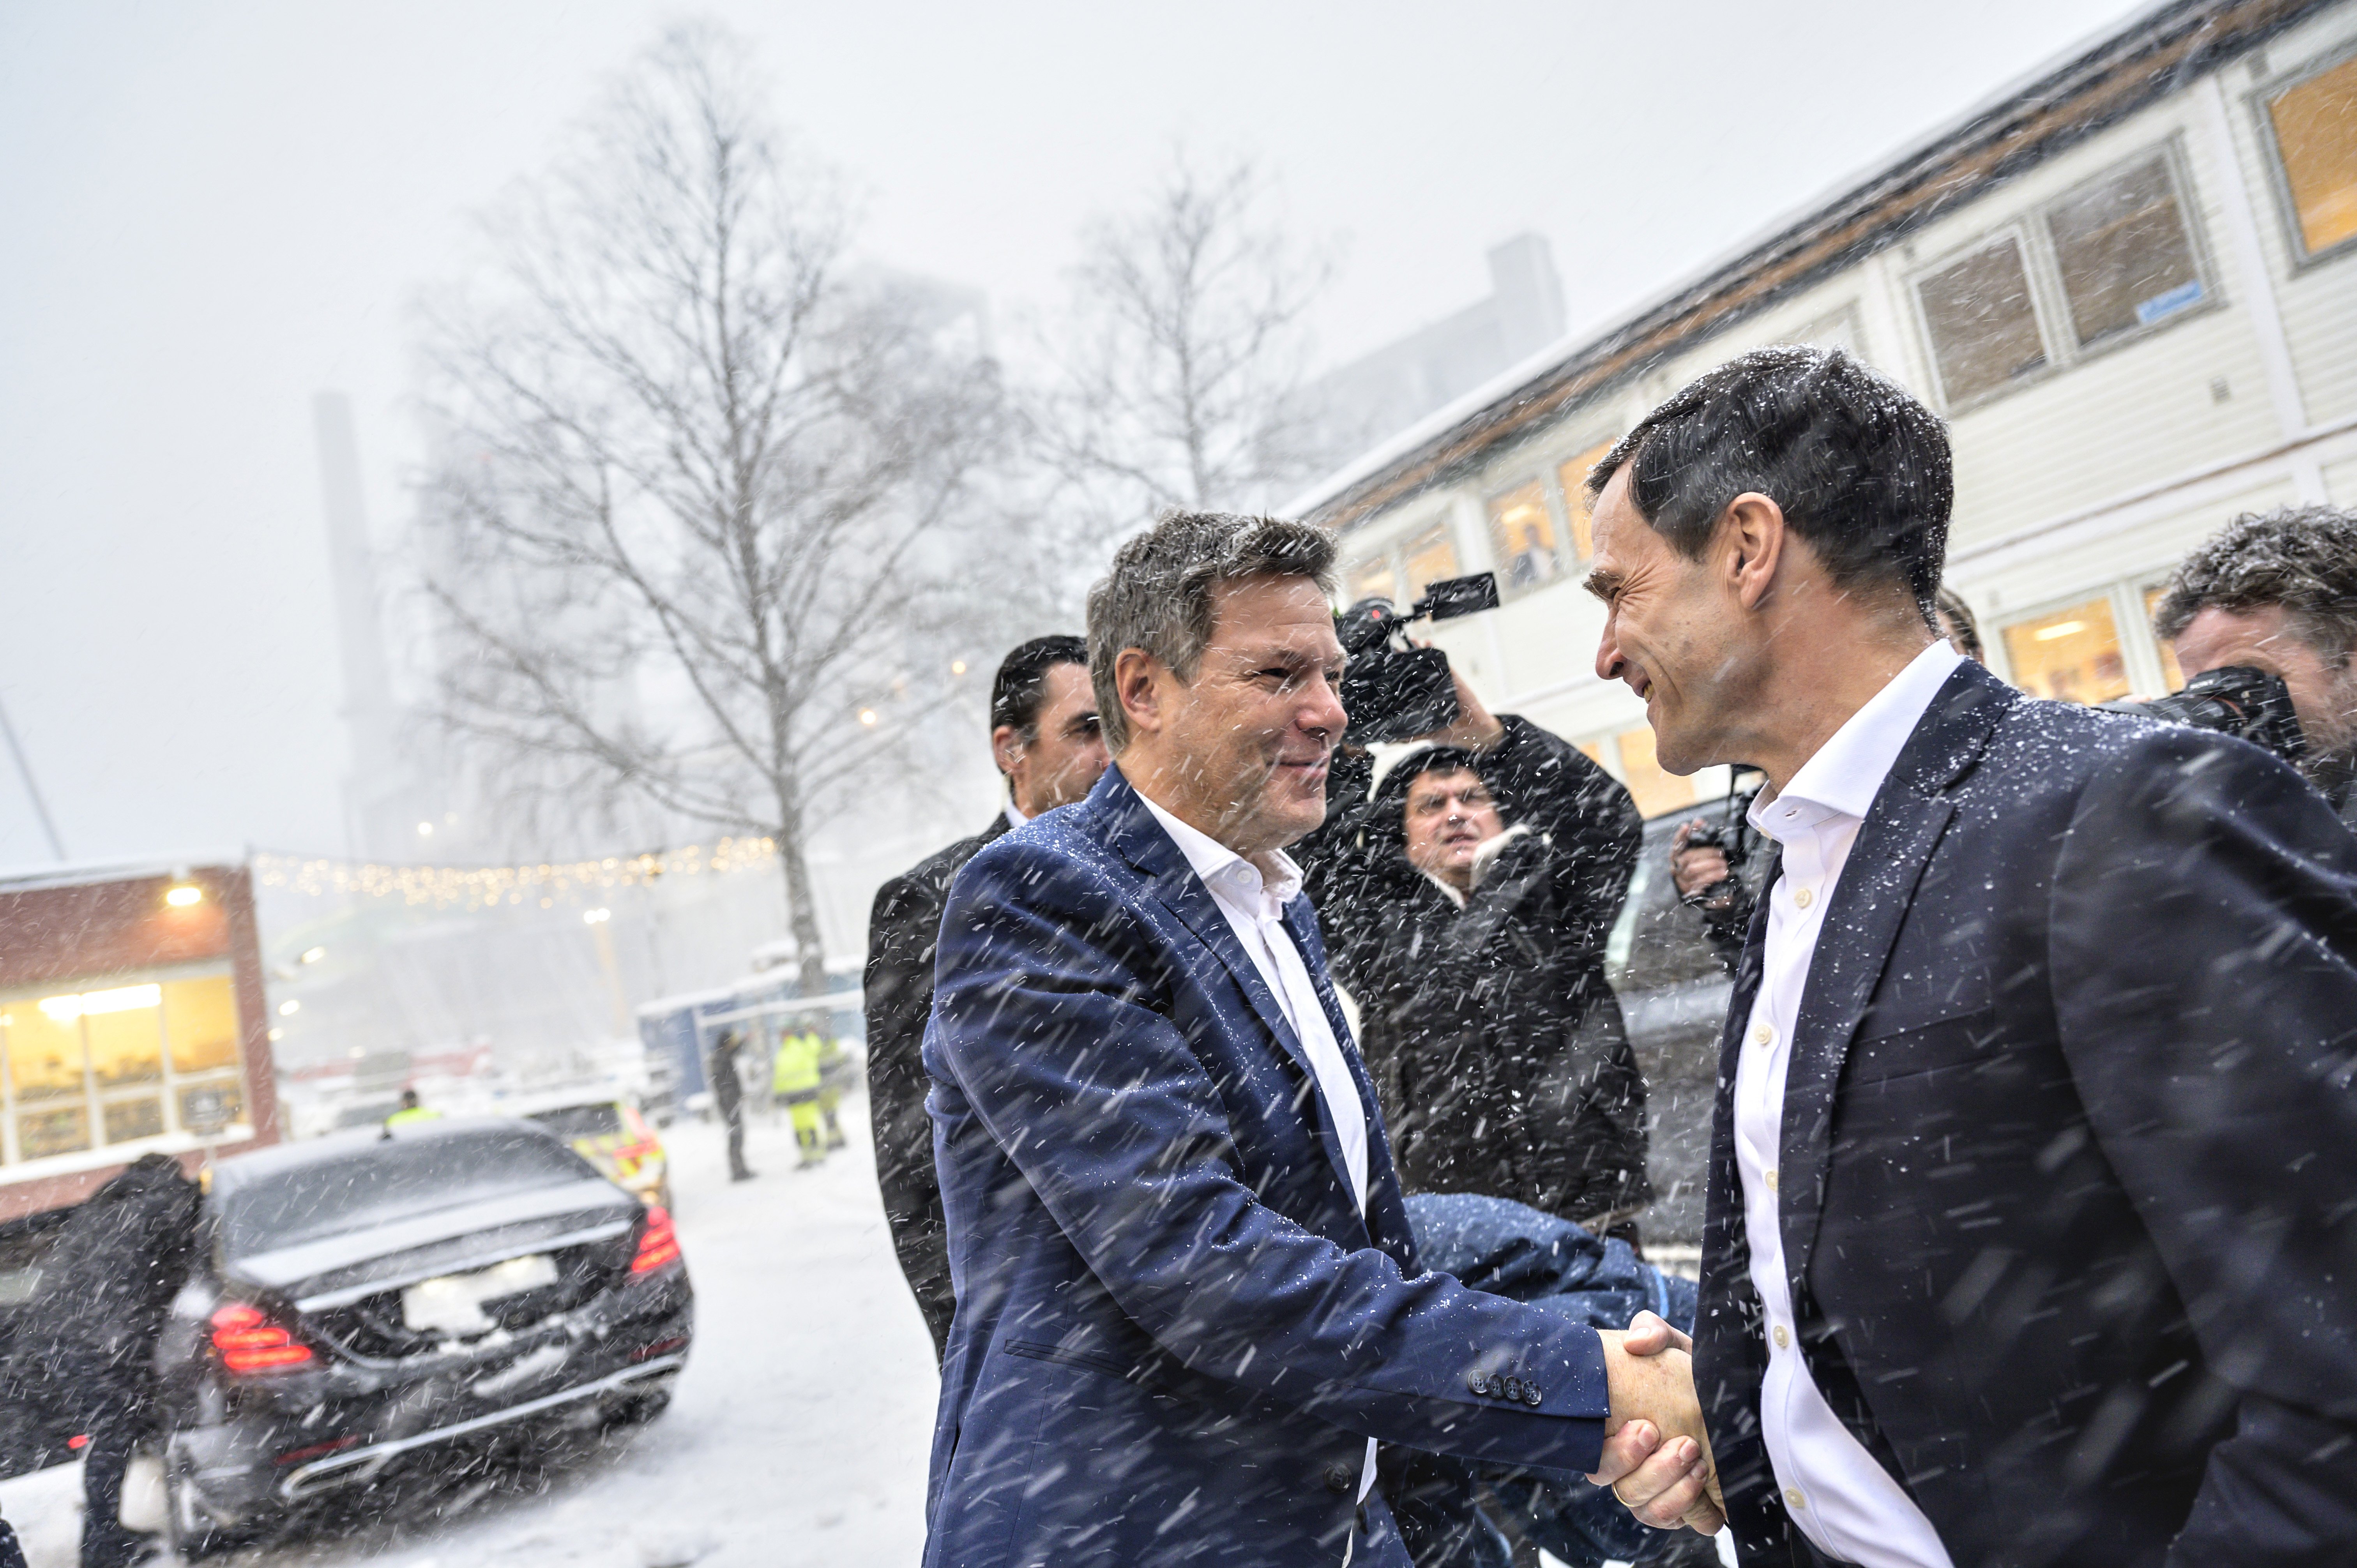 Two men in suits greet each other in the snow flurry, press people in the background